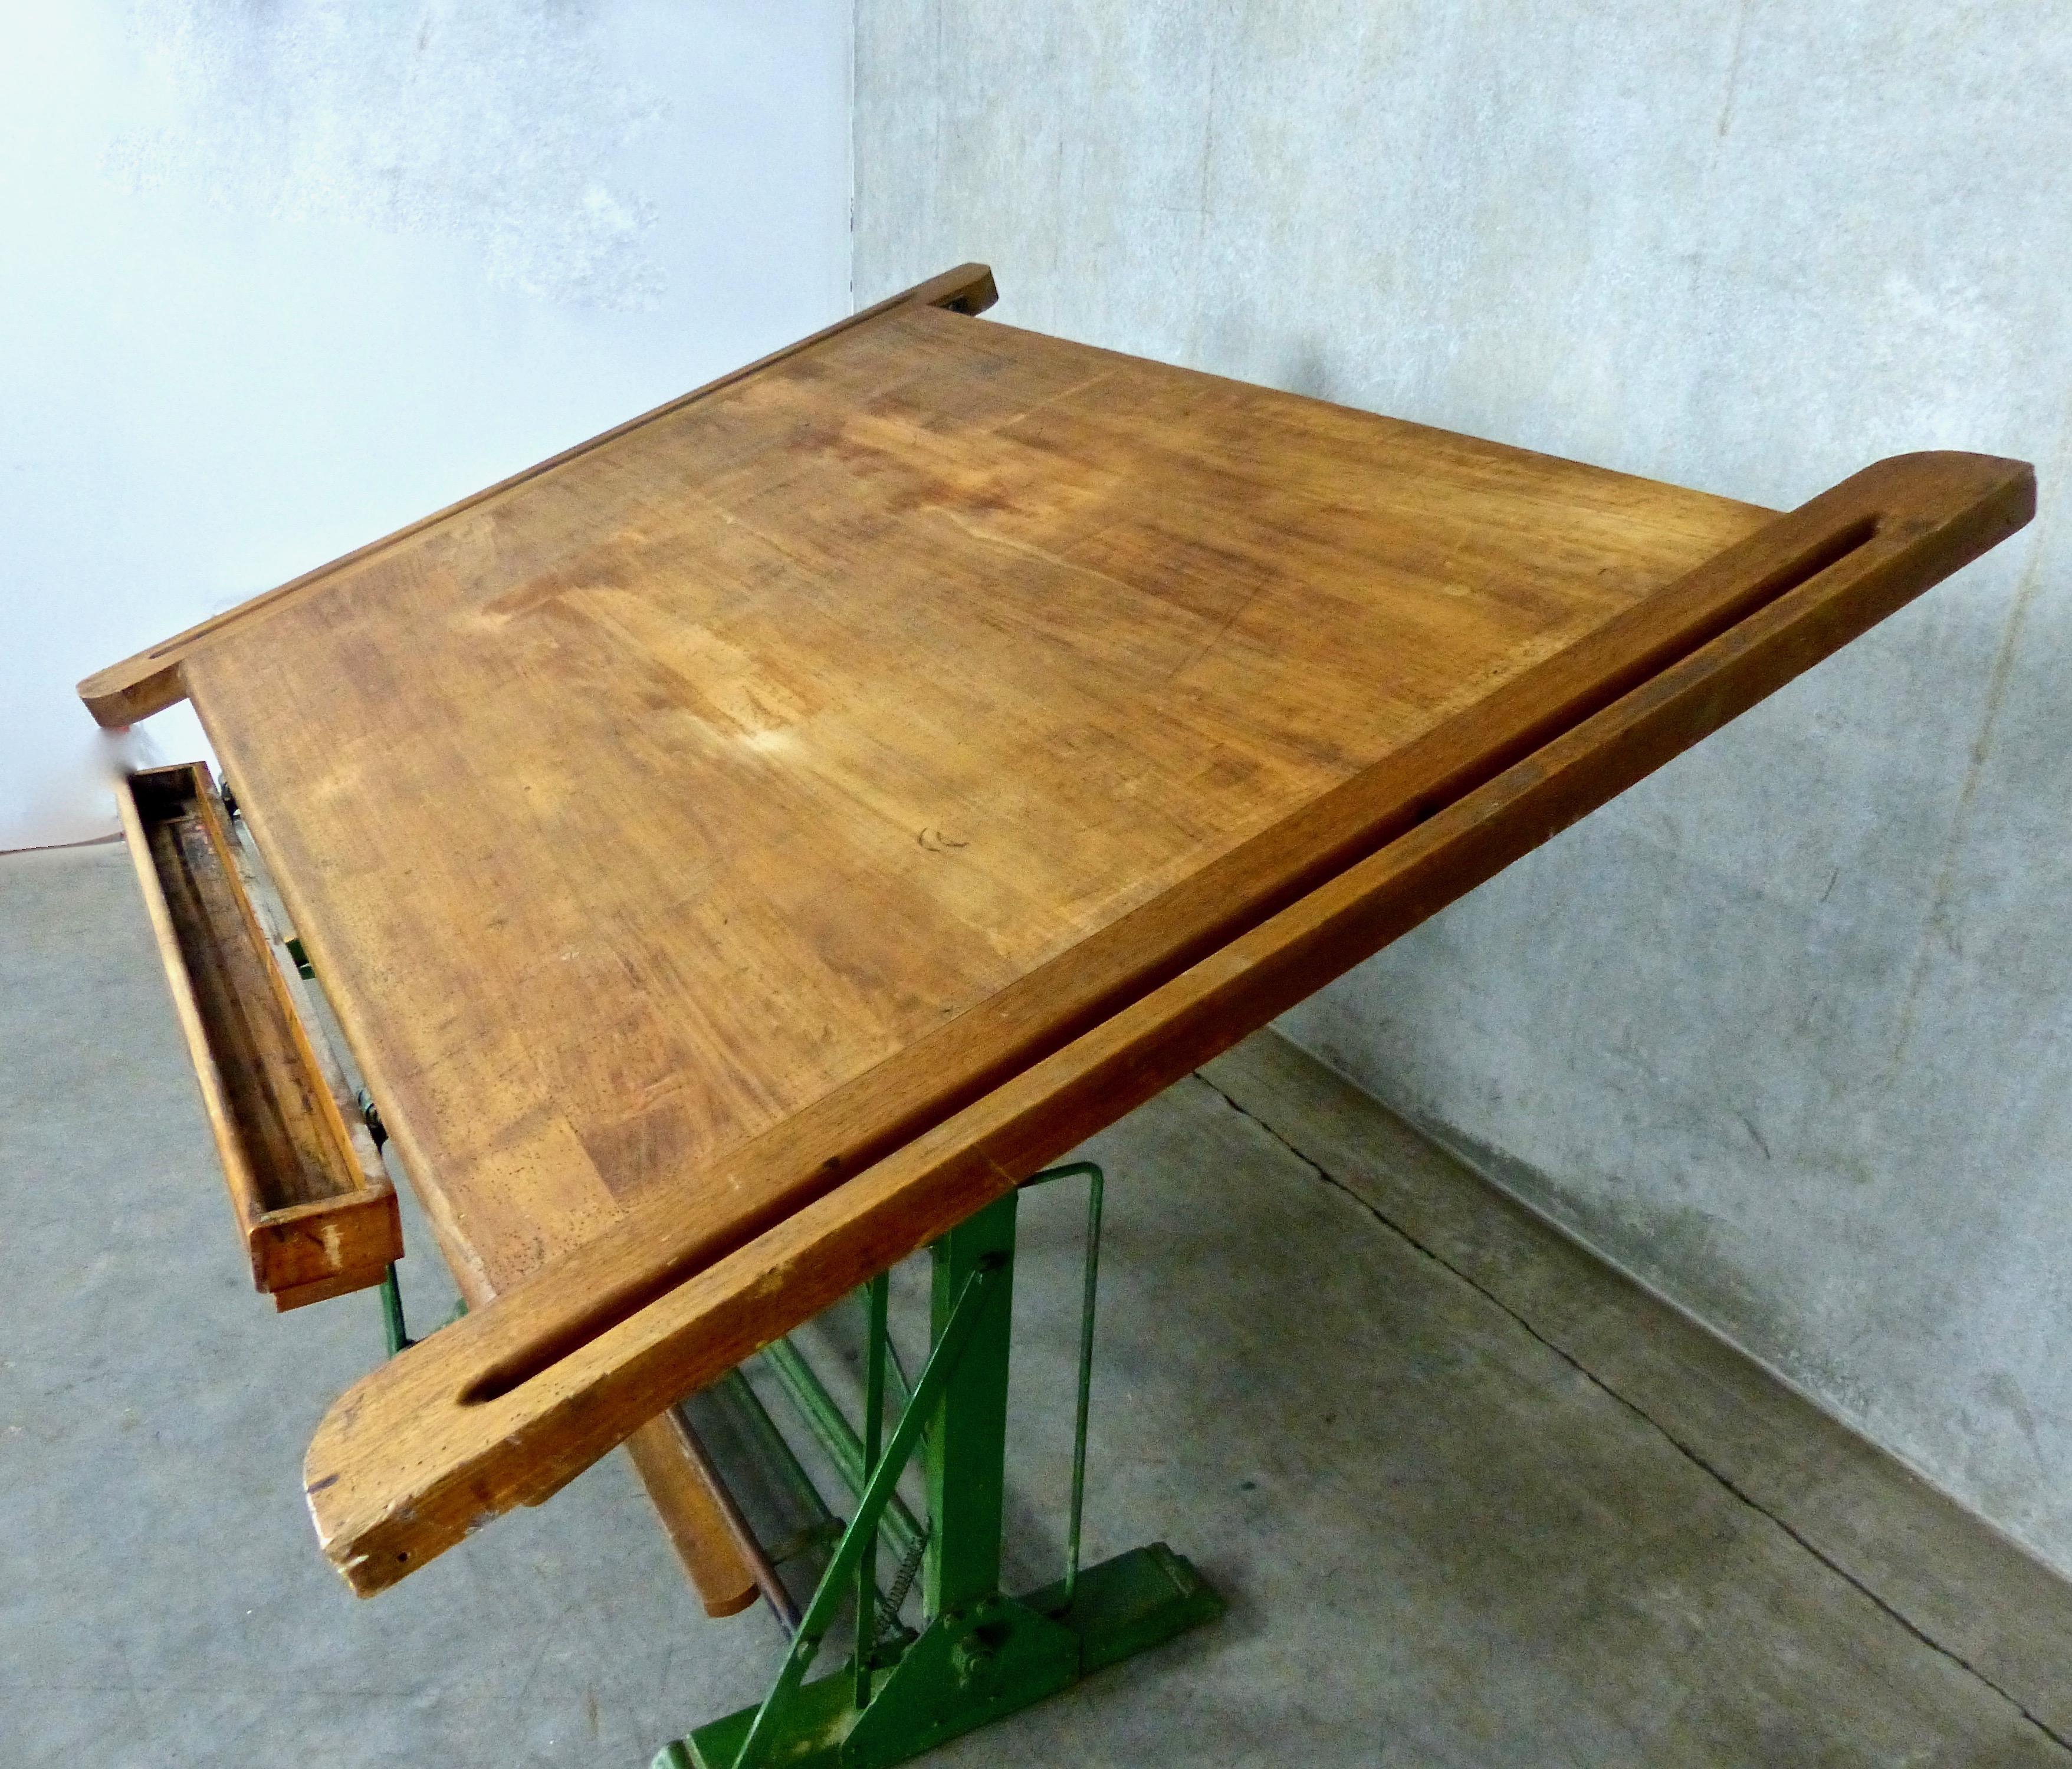 A fully adjustable wooden drafting table with a cast iron base. Made in the 1930s by Kahn Freres of Bruxelles, an office furniture design firm. Beautiful patina on its oak wood top, which also features a separate pencil case in pine. Hard-to-find